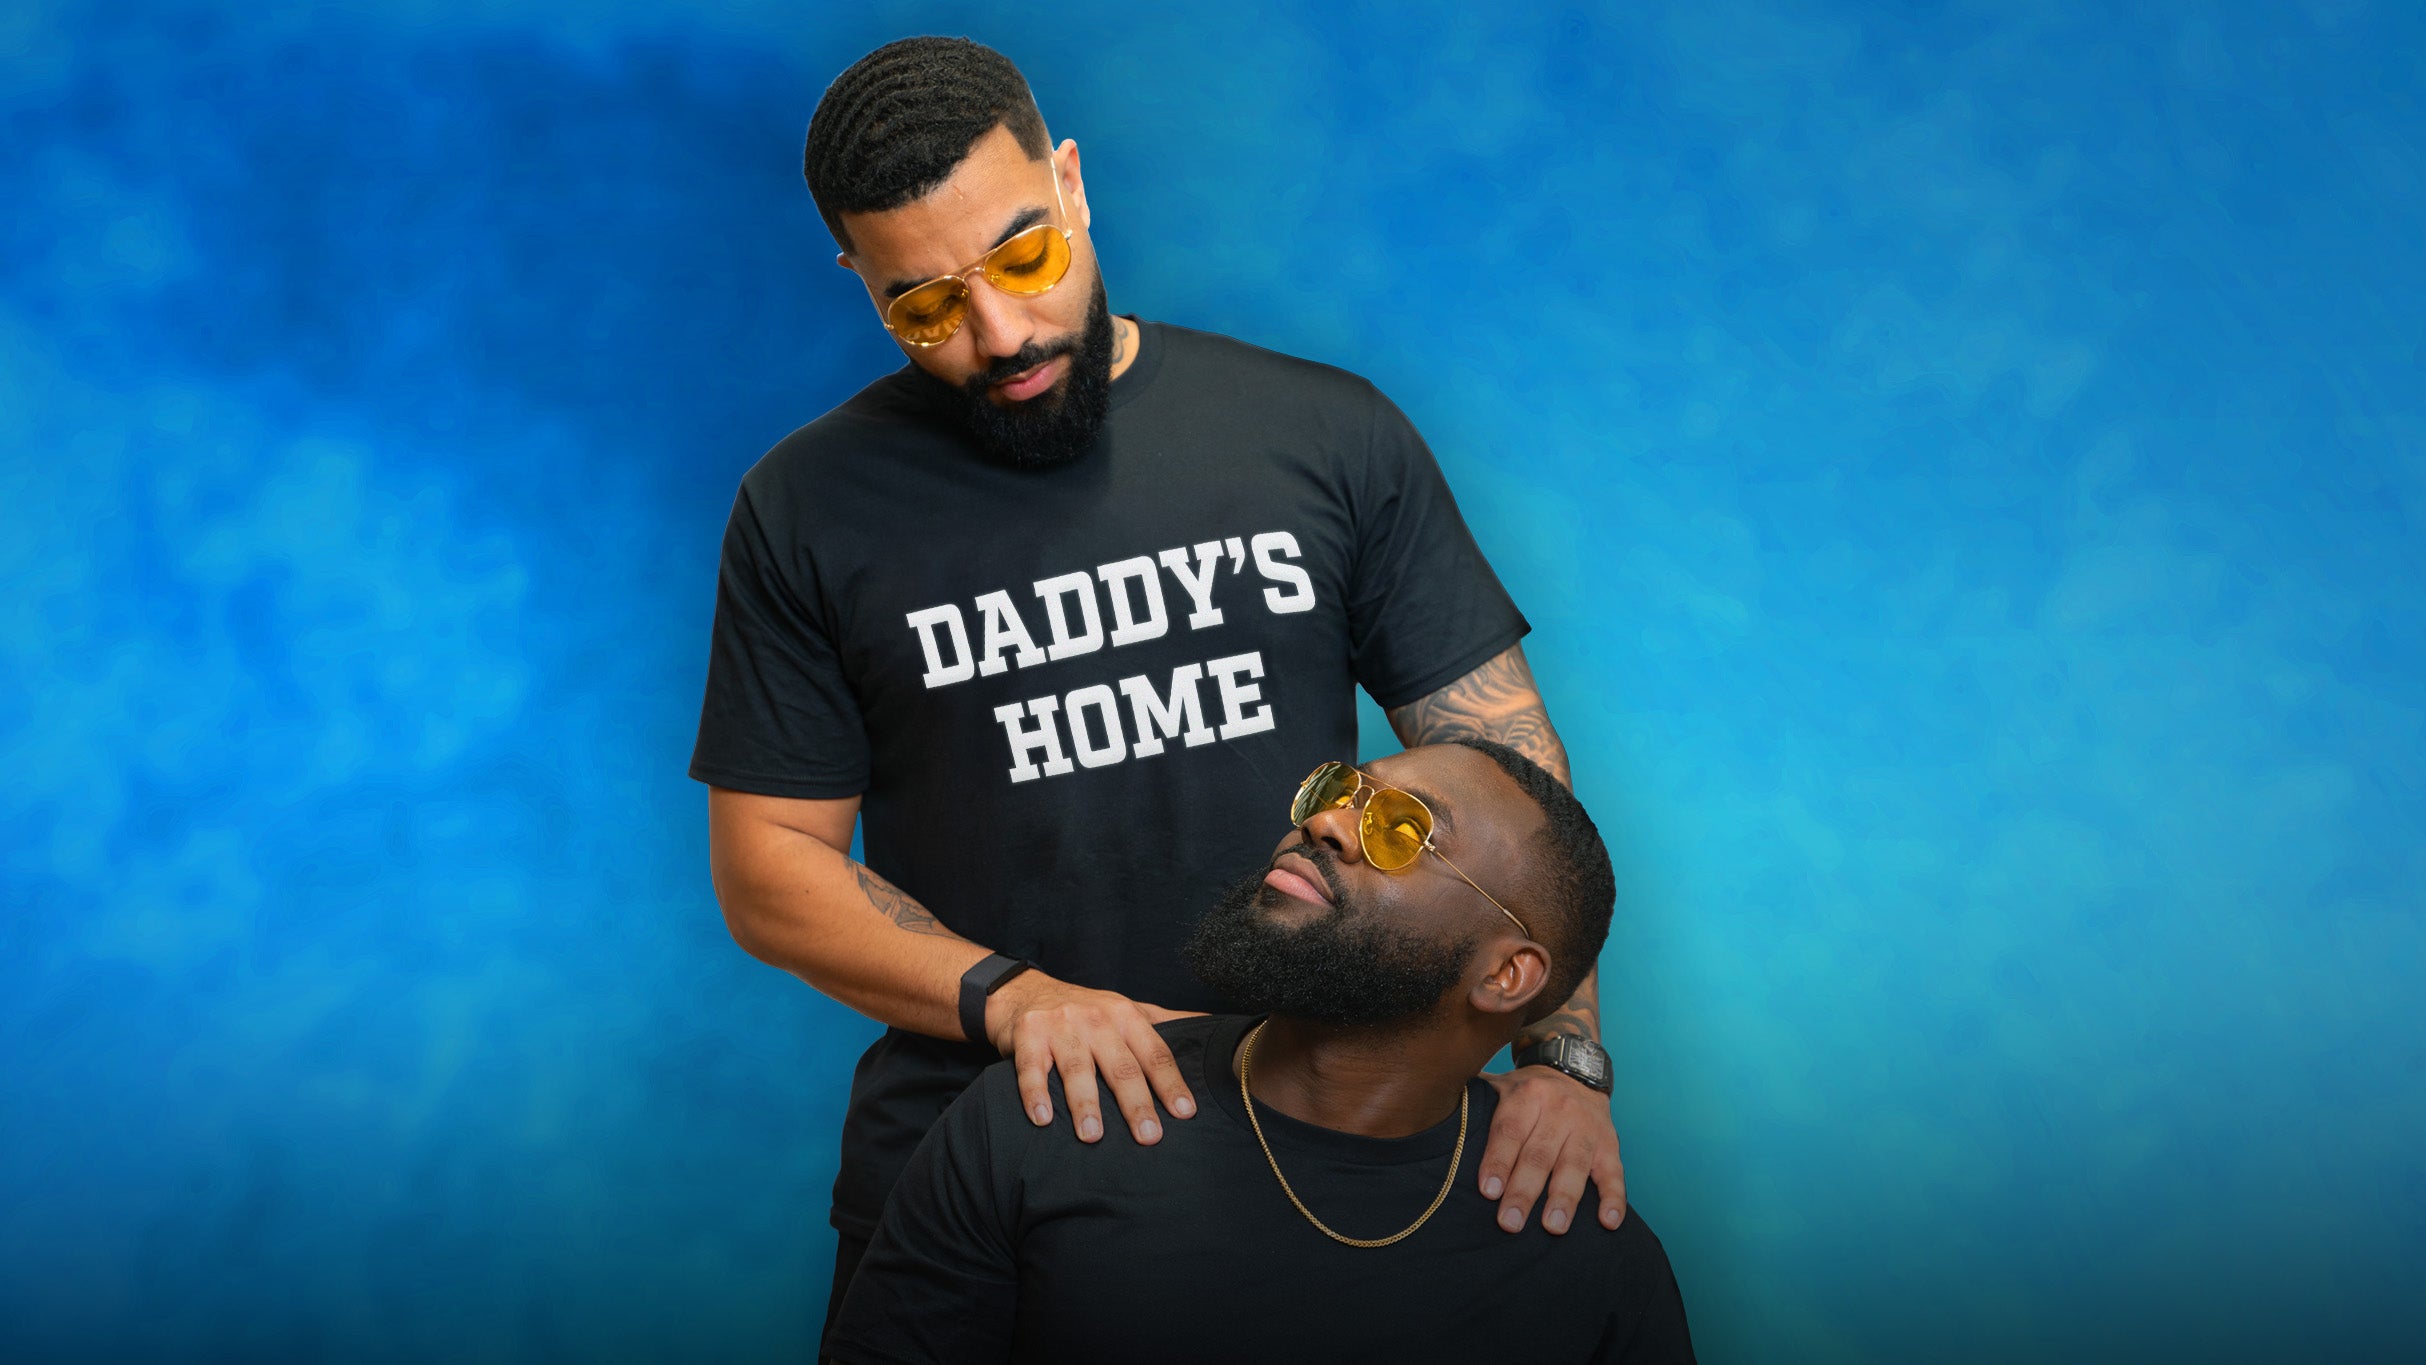 The Town Hall Presents ShxtsNgigs: Daddy's Home Tour presale password